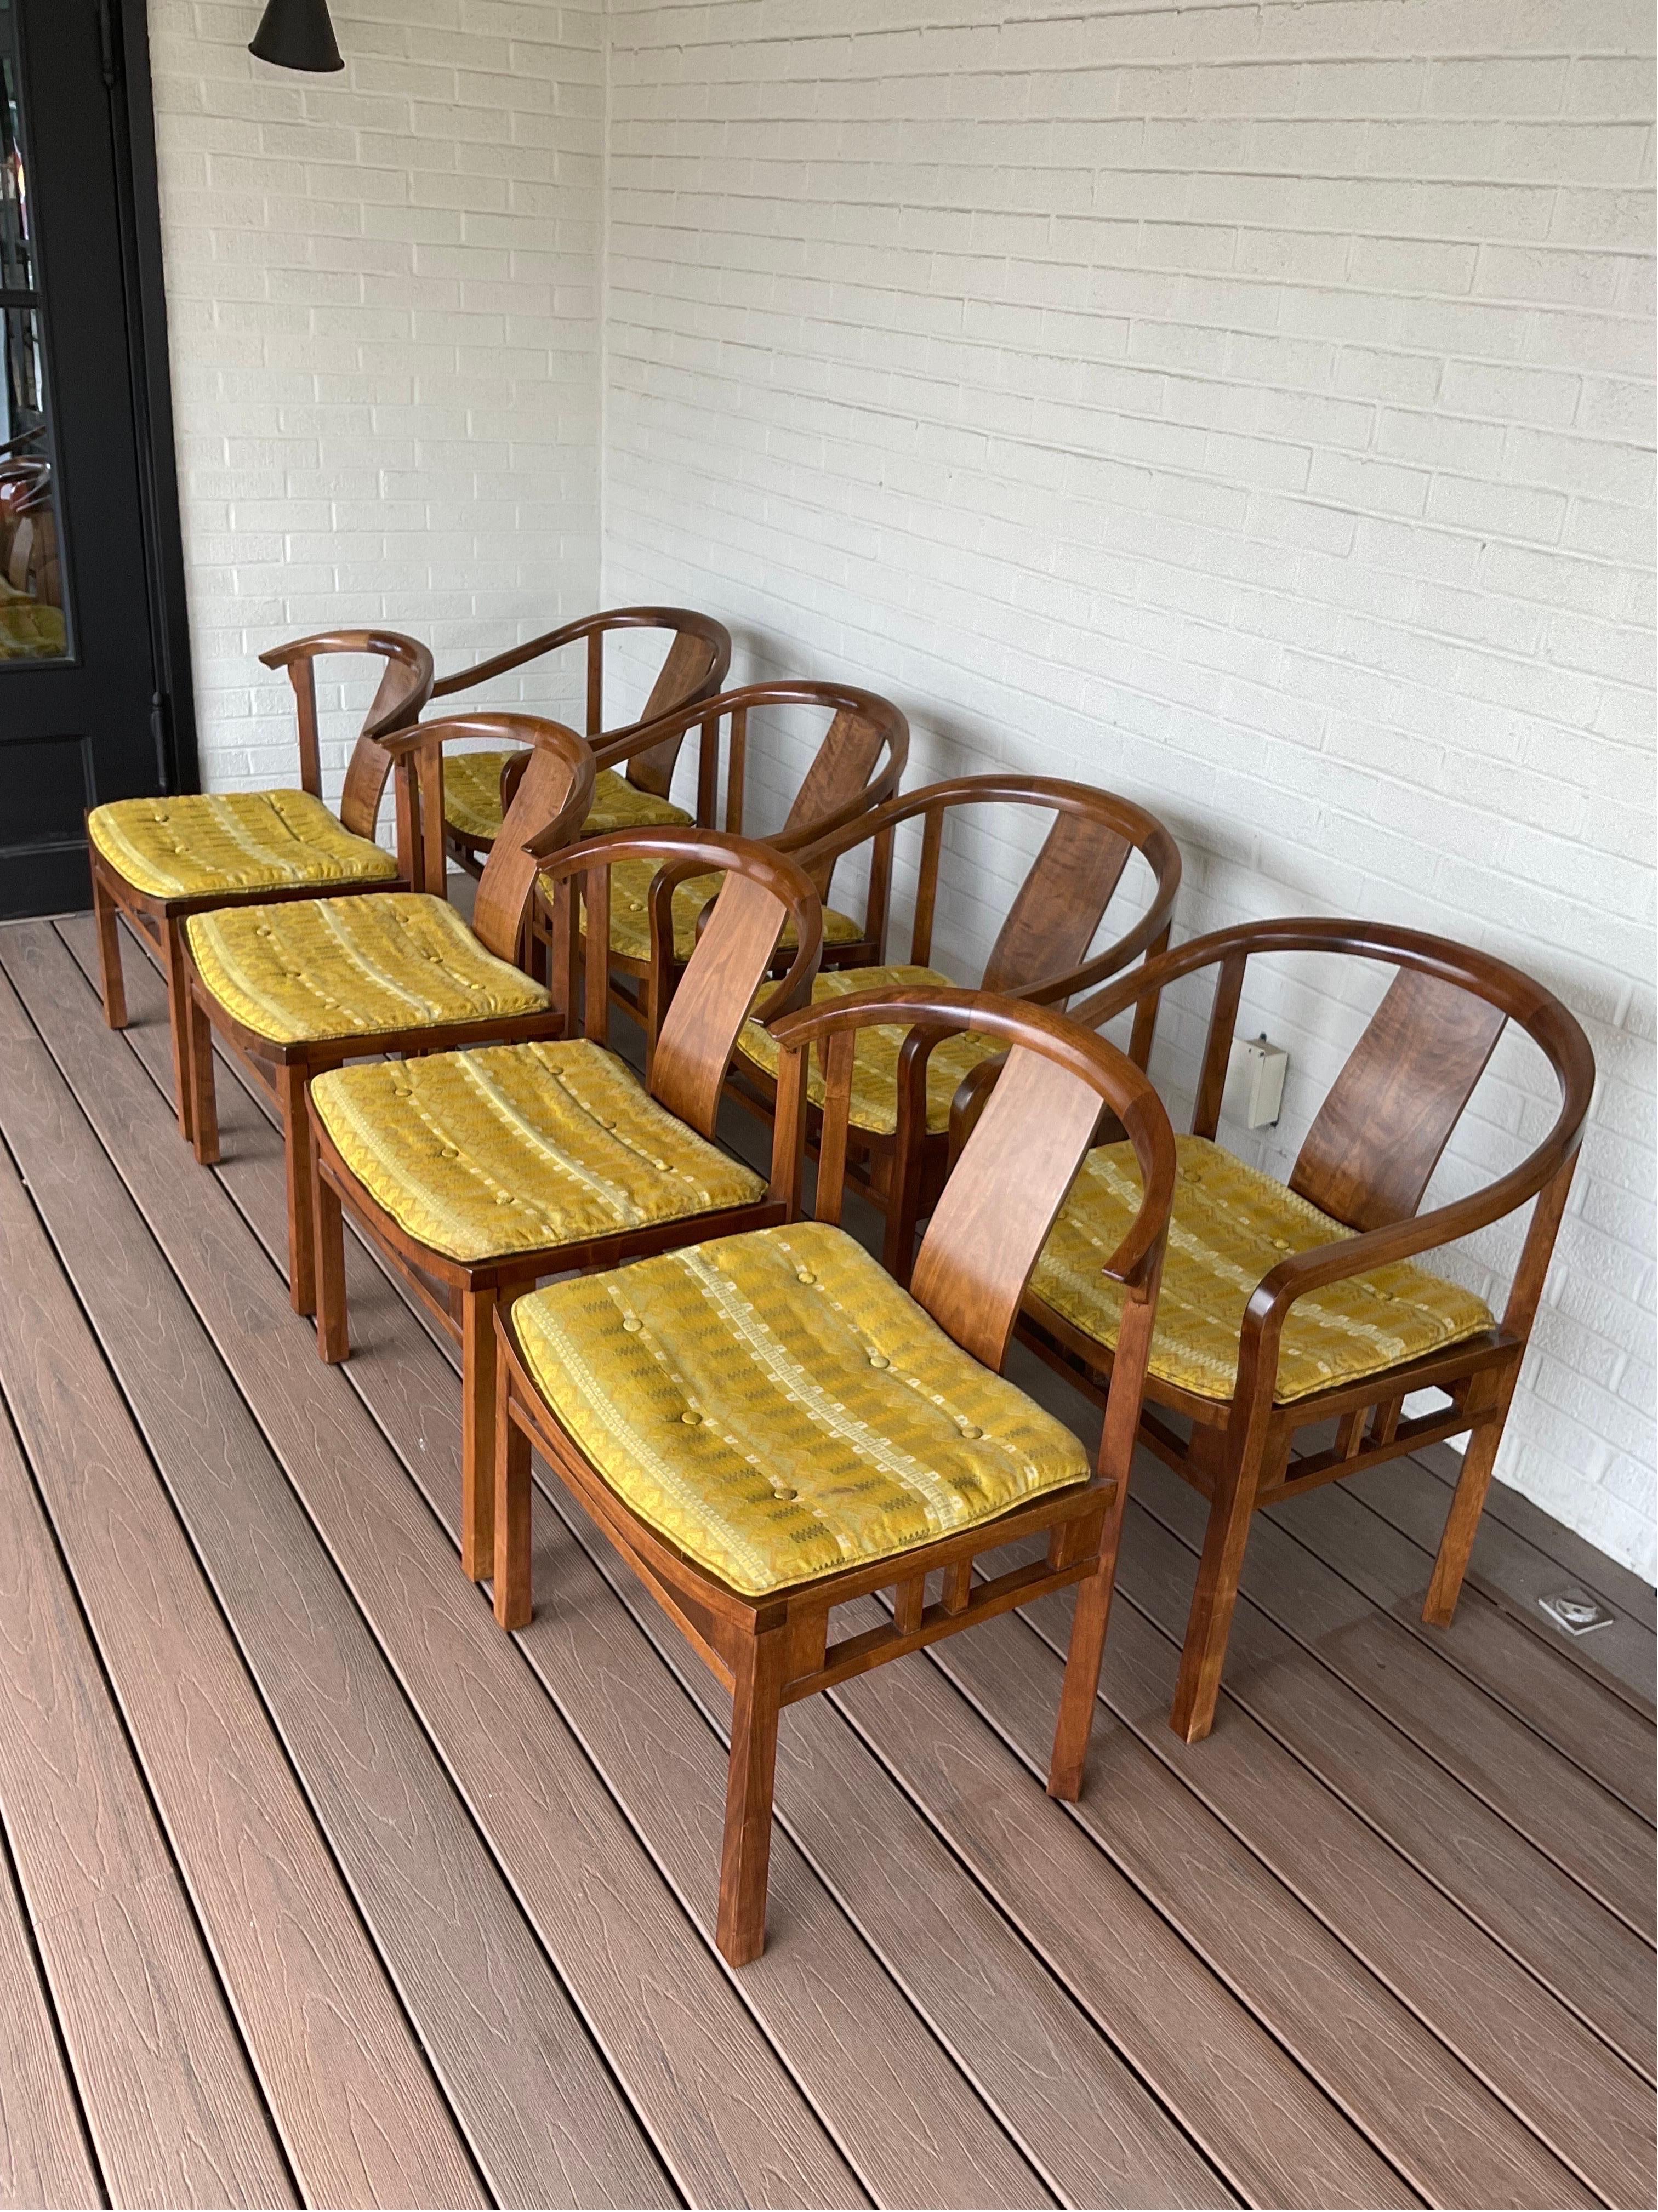 Mid-20th Century 1950s Walnut Dining Chairs by Michael Taylor for Baker Furniture - Set of 10 For Sale